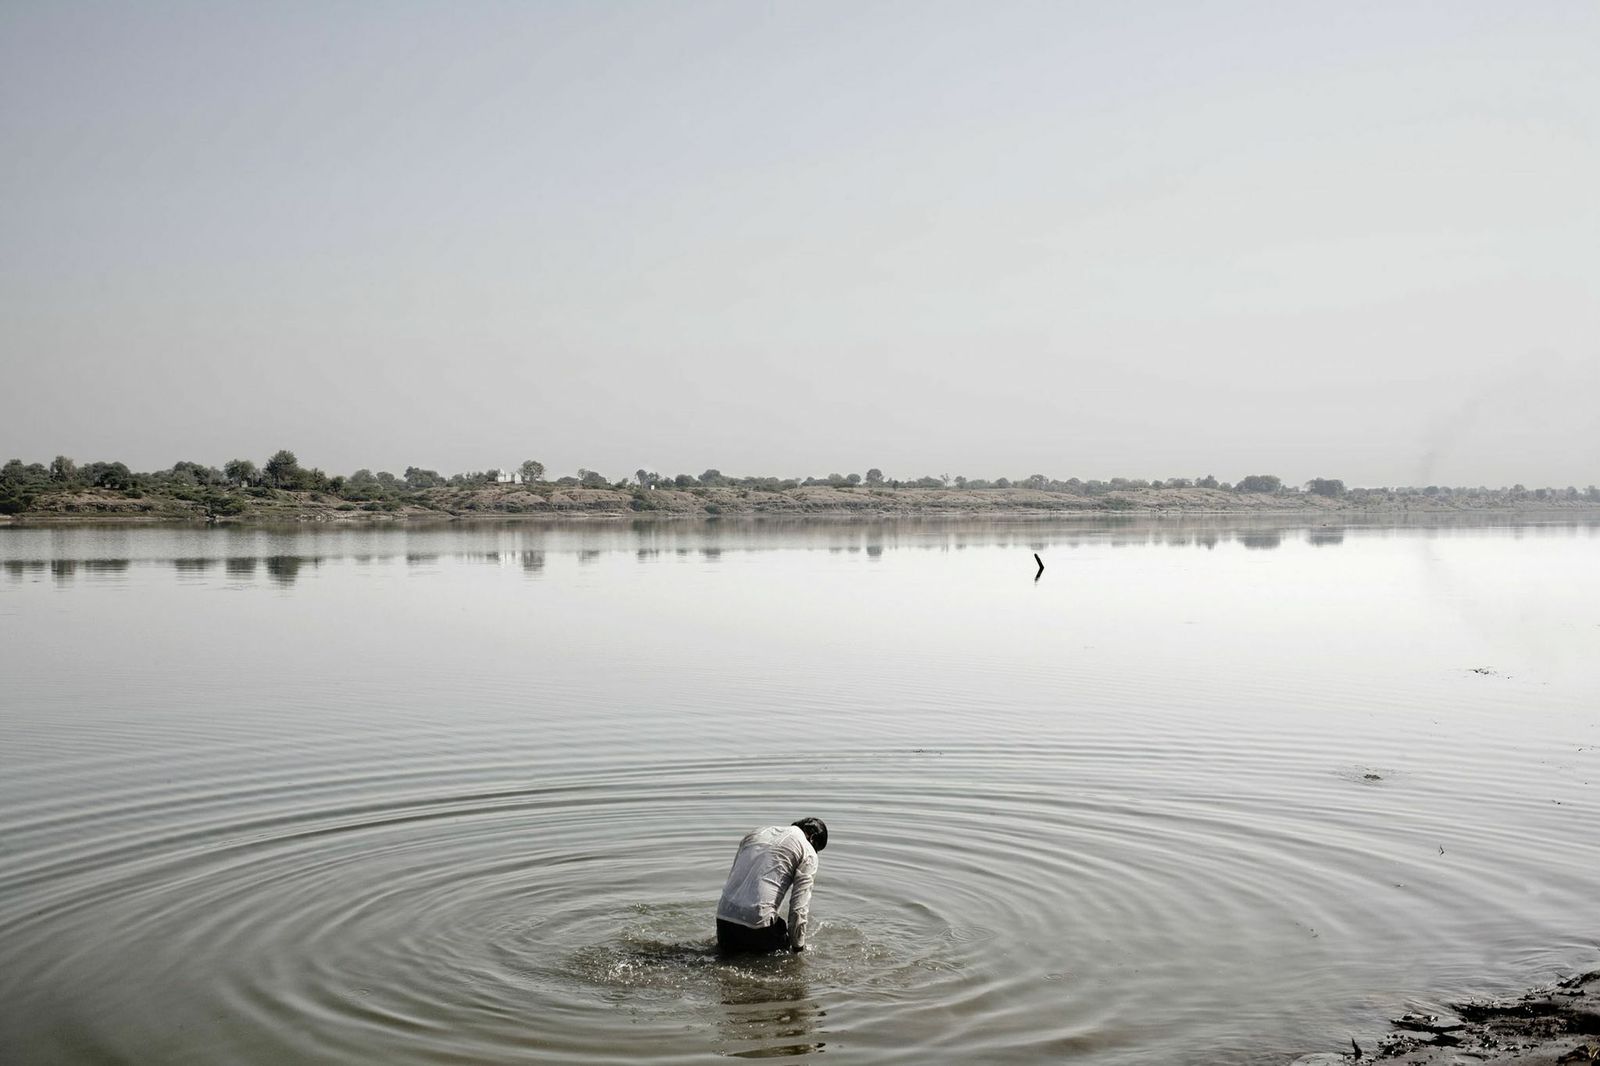 A Hindu man performs a religious ritual in the waters near Varanasi, India, 2008.